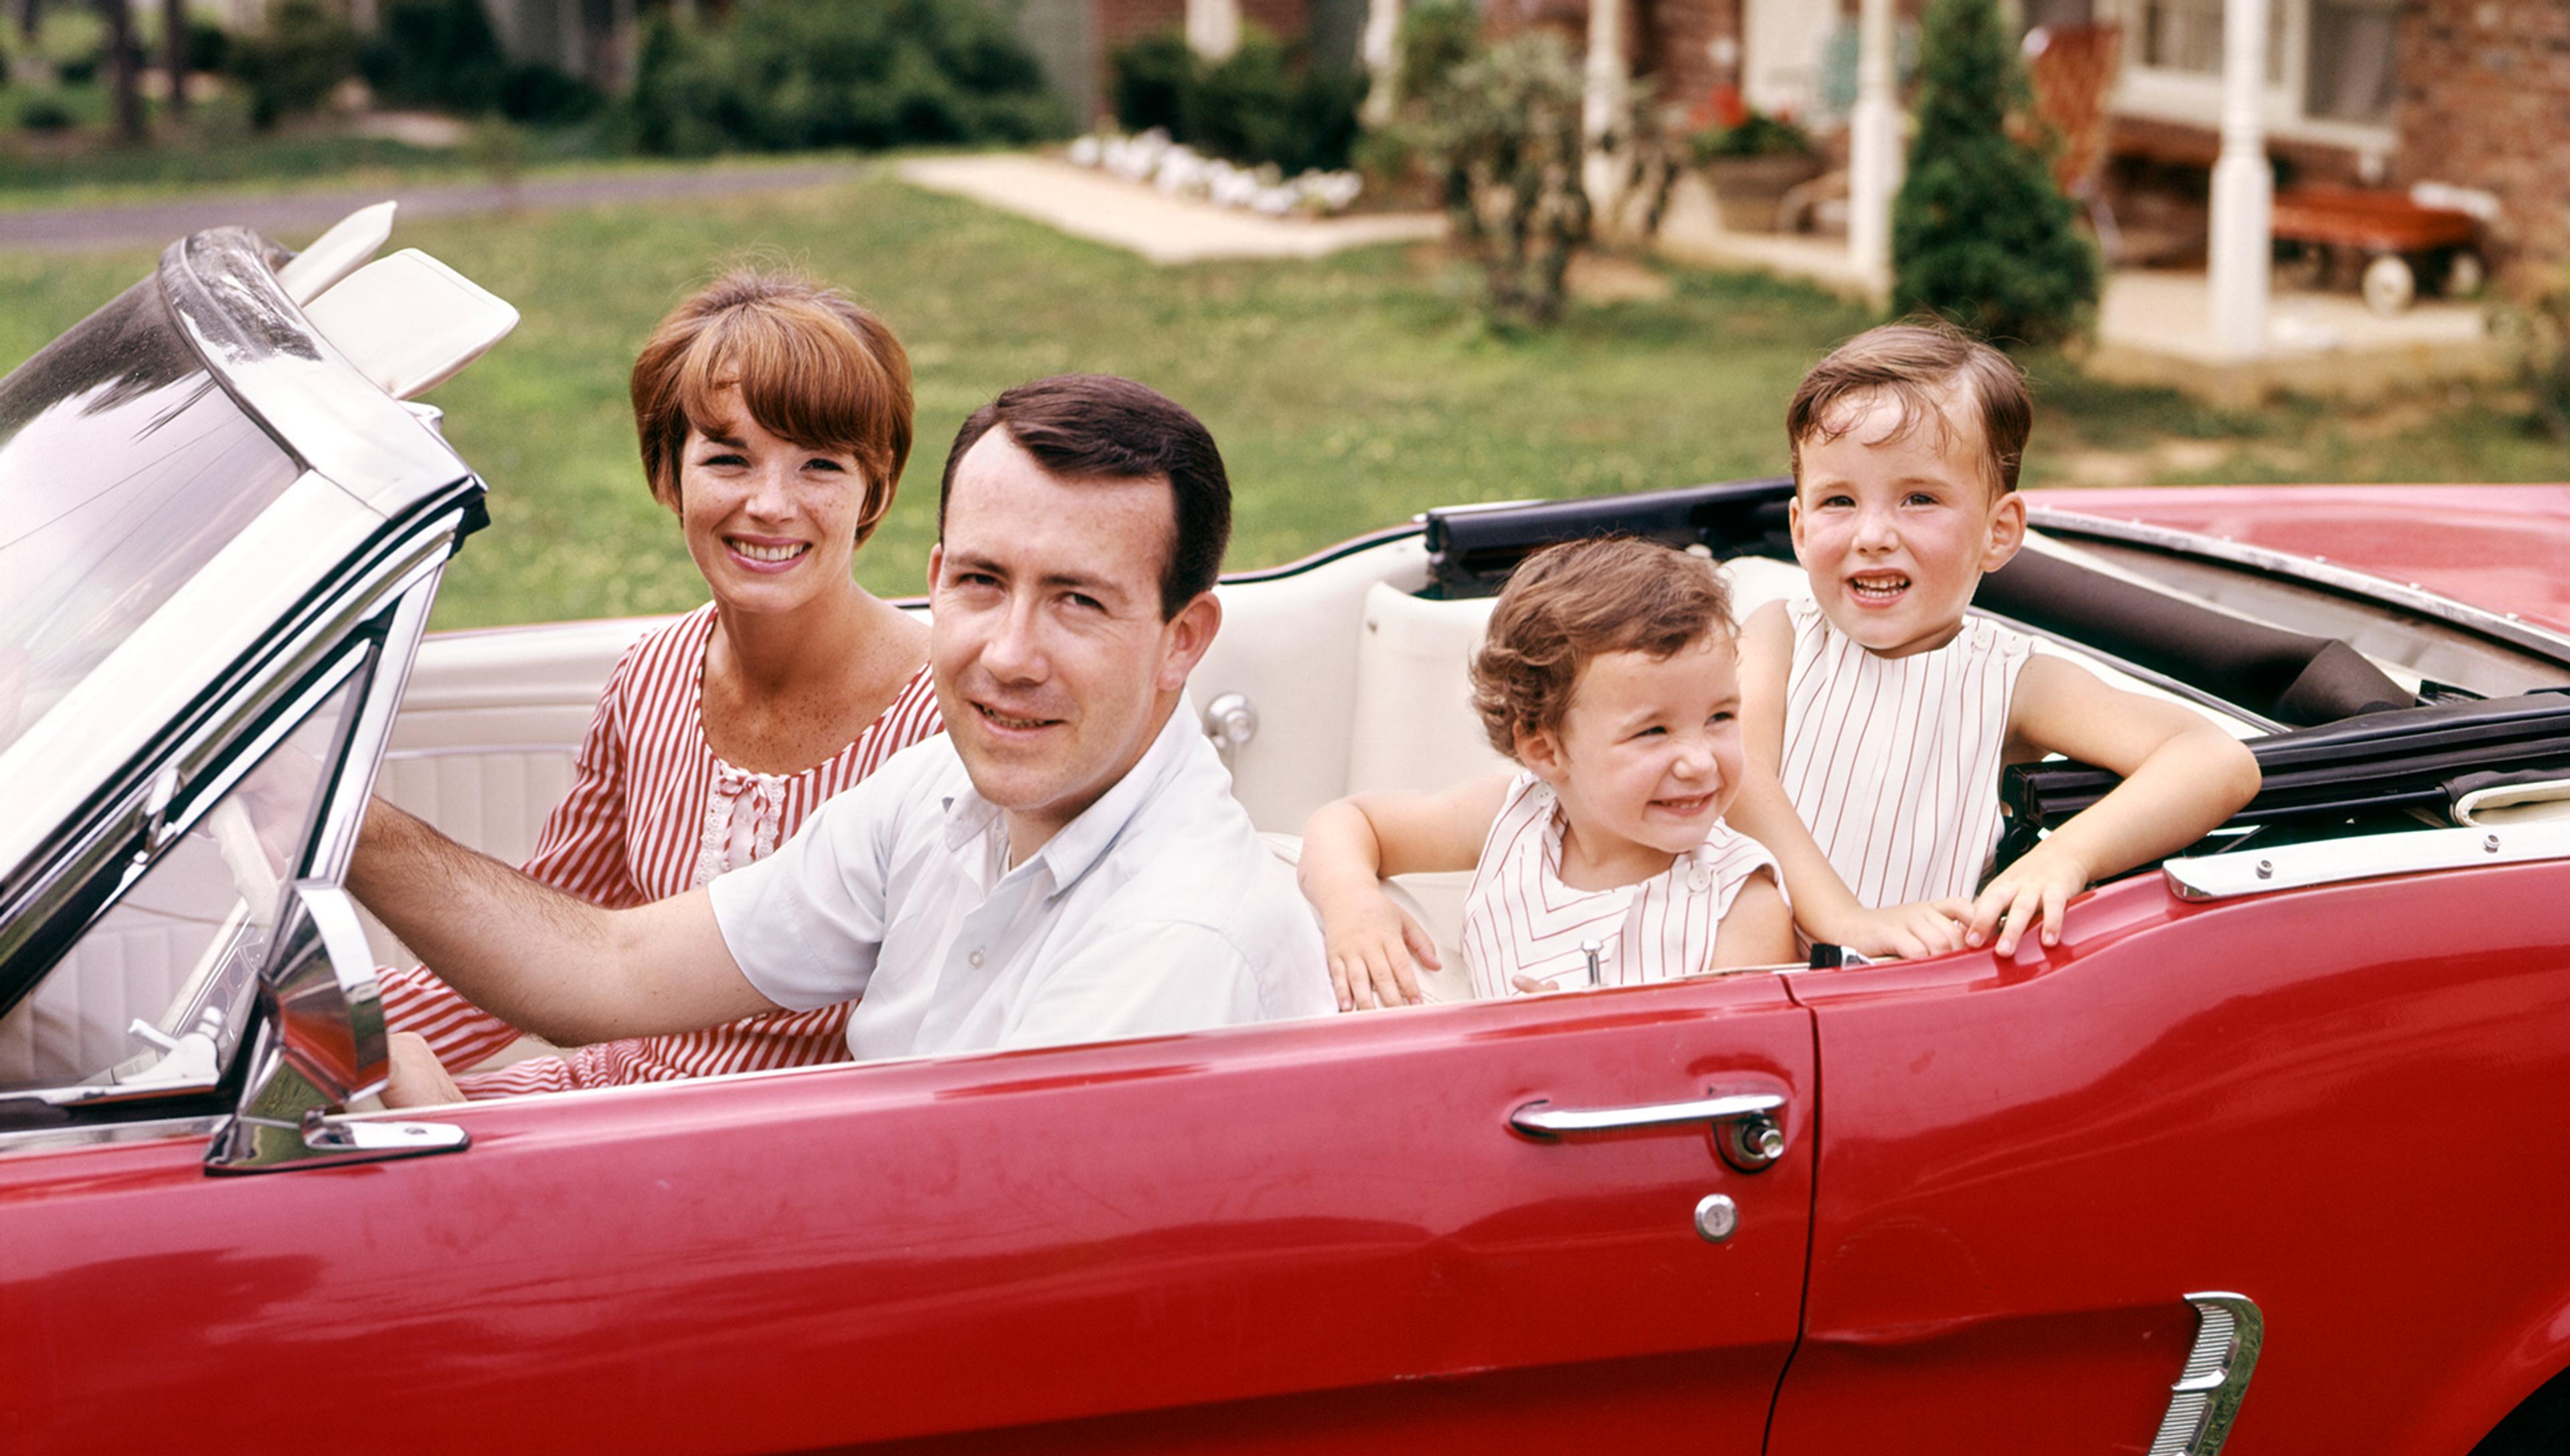 A family of four smiling and sitting in a red convertible car parked outside a house with green lawn.